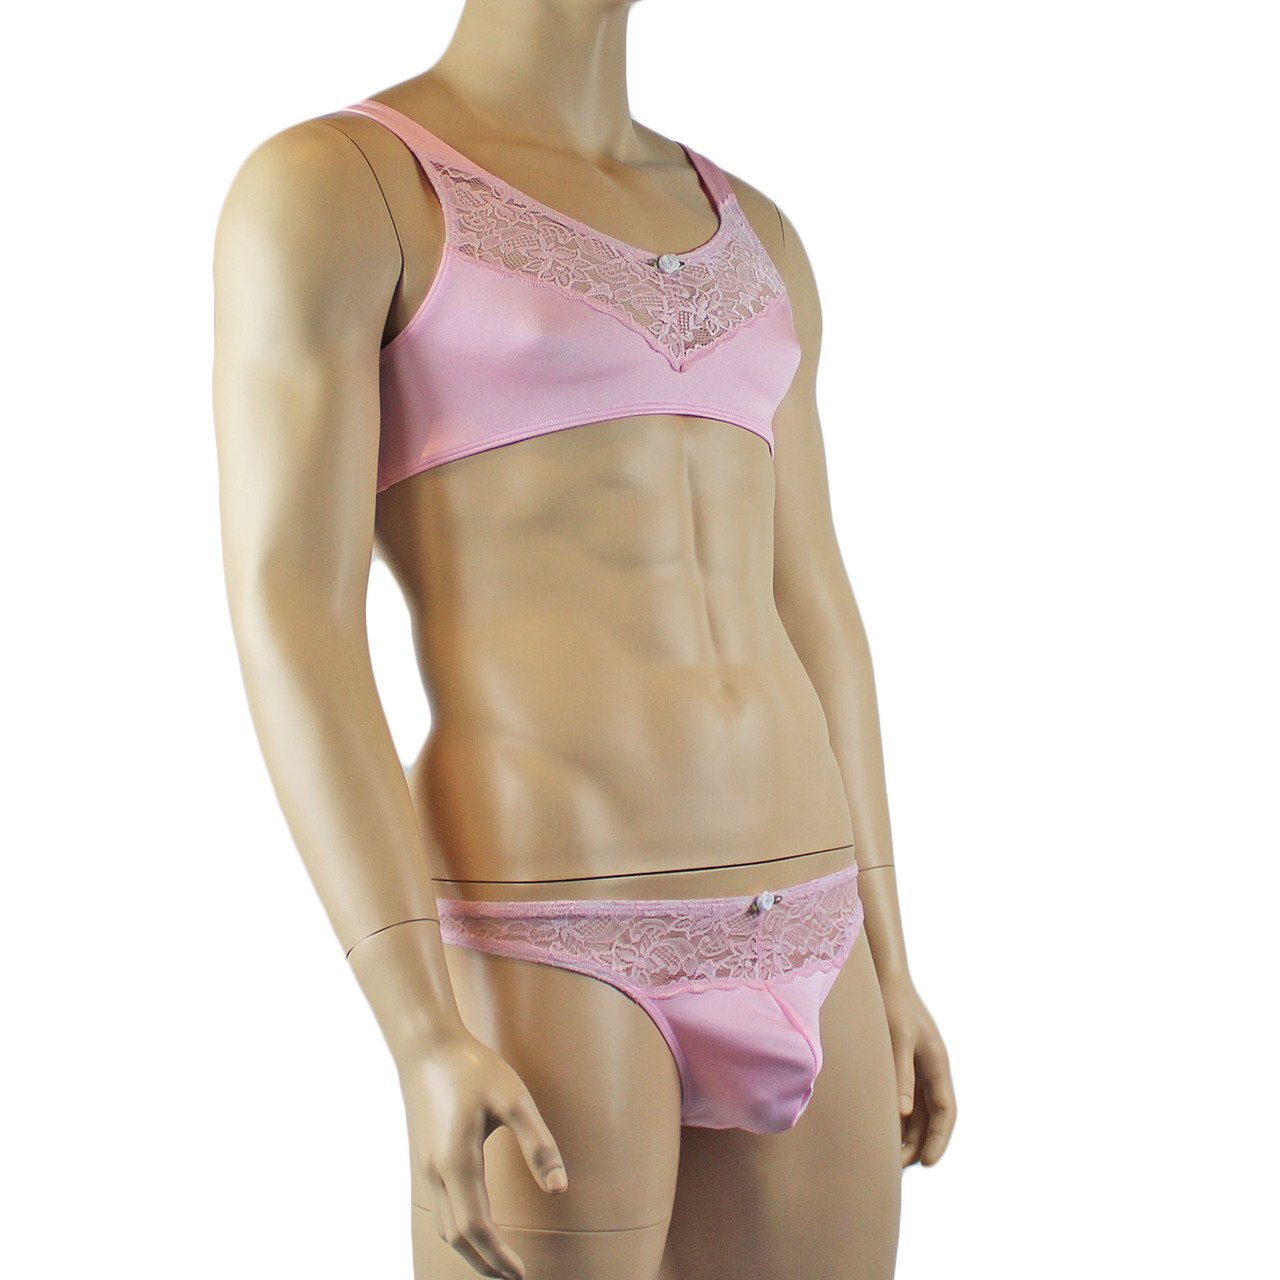 Male Lingerie Bra Top with V Lace front and G string Thong (light pink plus other colours)